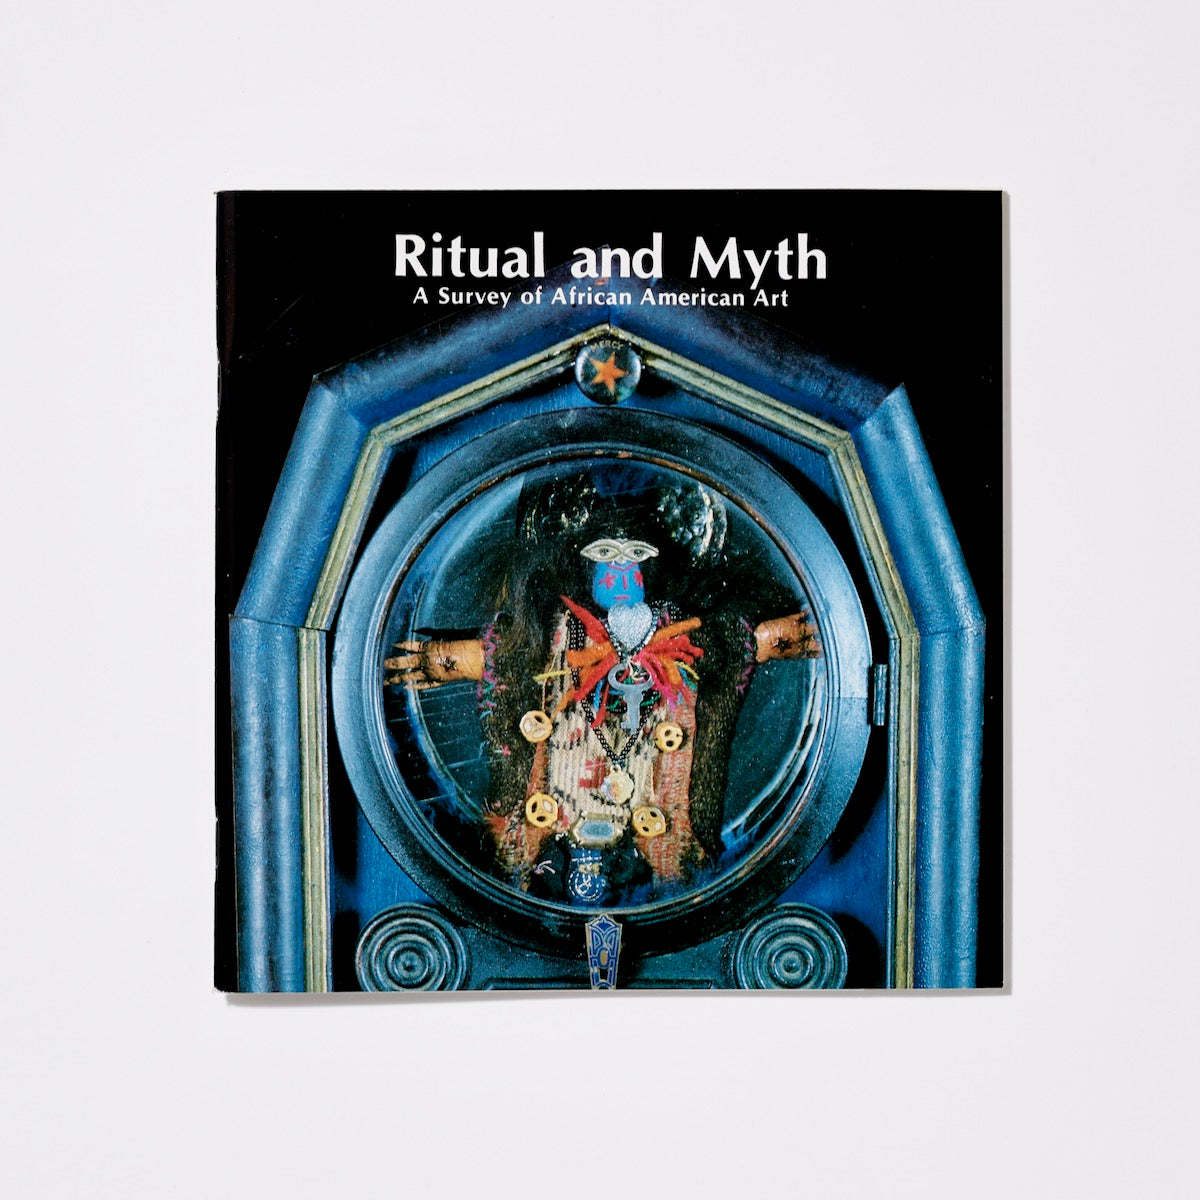 Ritual and Myth: A Survey of African American Art